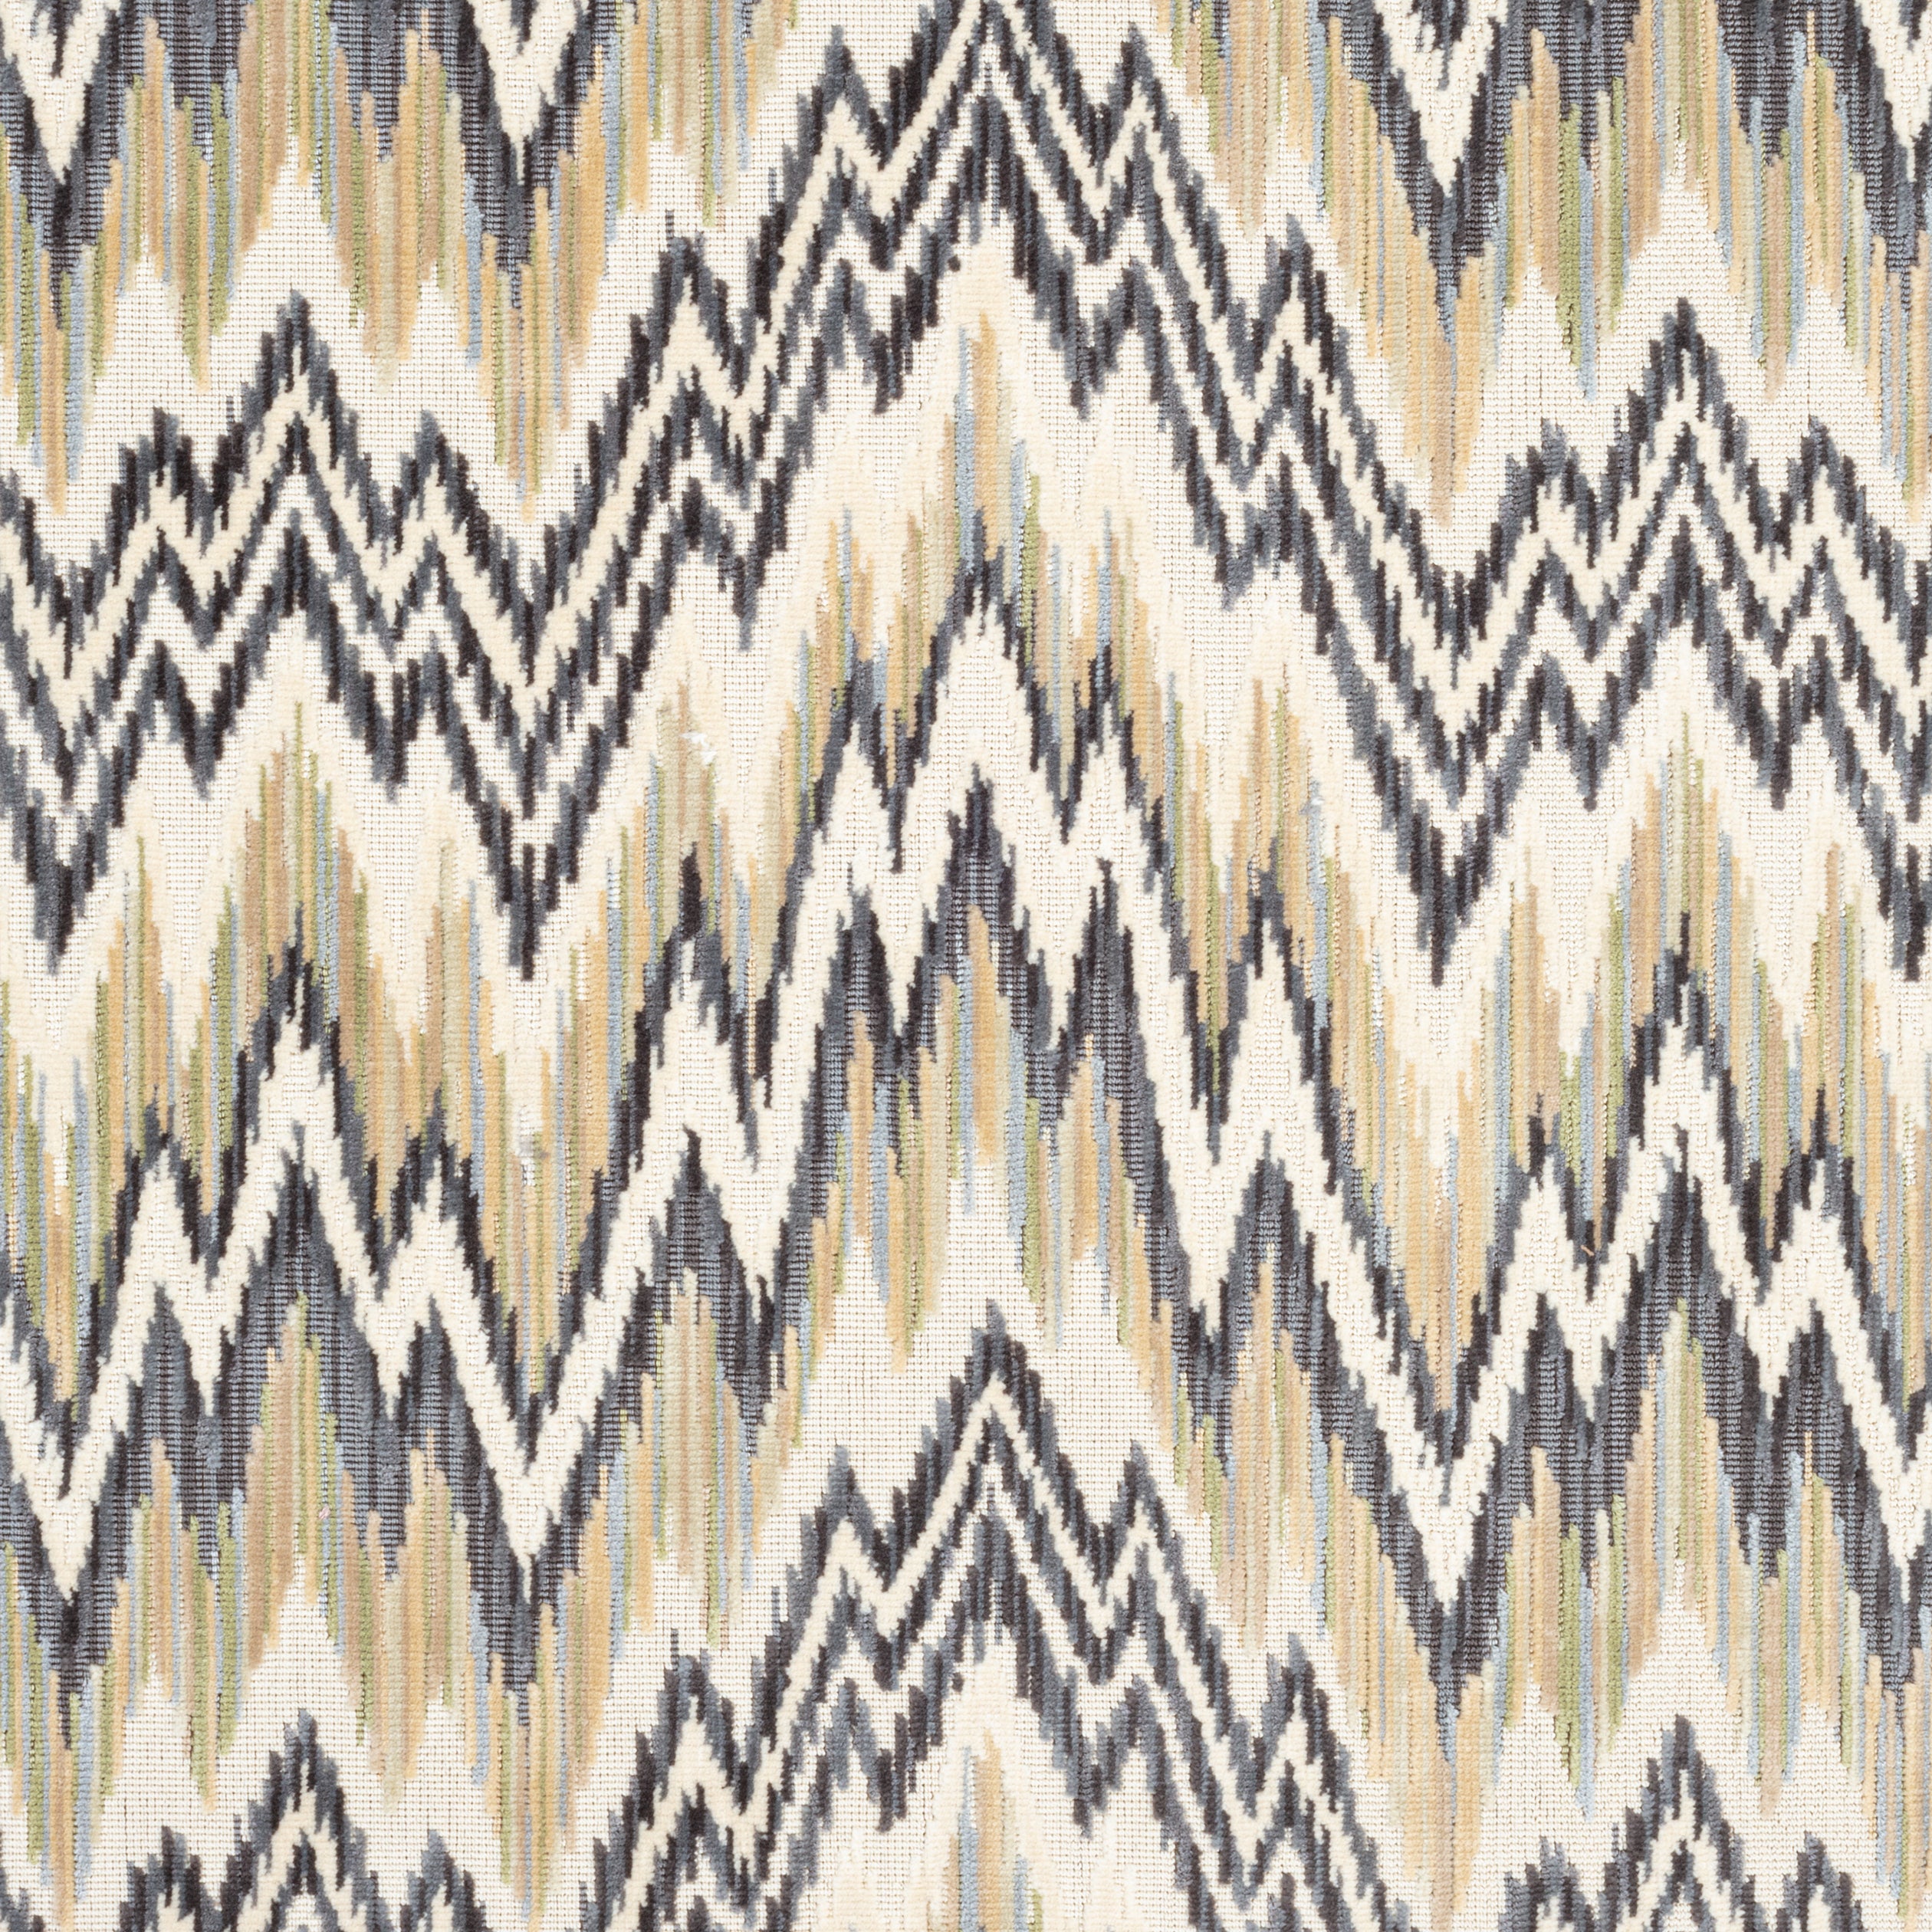 Rhythm Velvet fabric in grain and charcoal color - pattern number W72819 - by Thibaut in the Woven Resource 13: Fusion Velvets collection